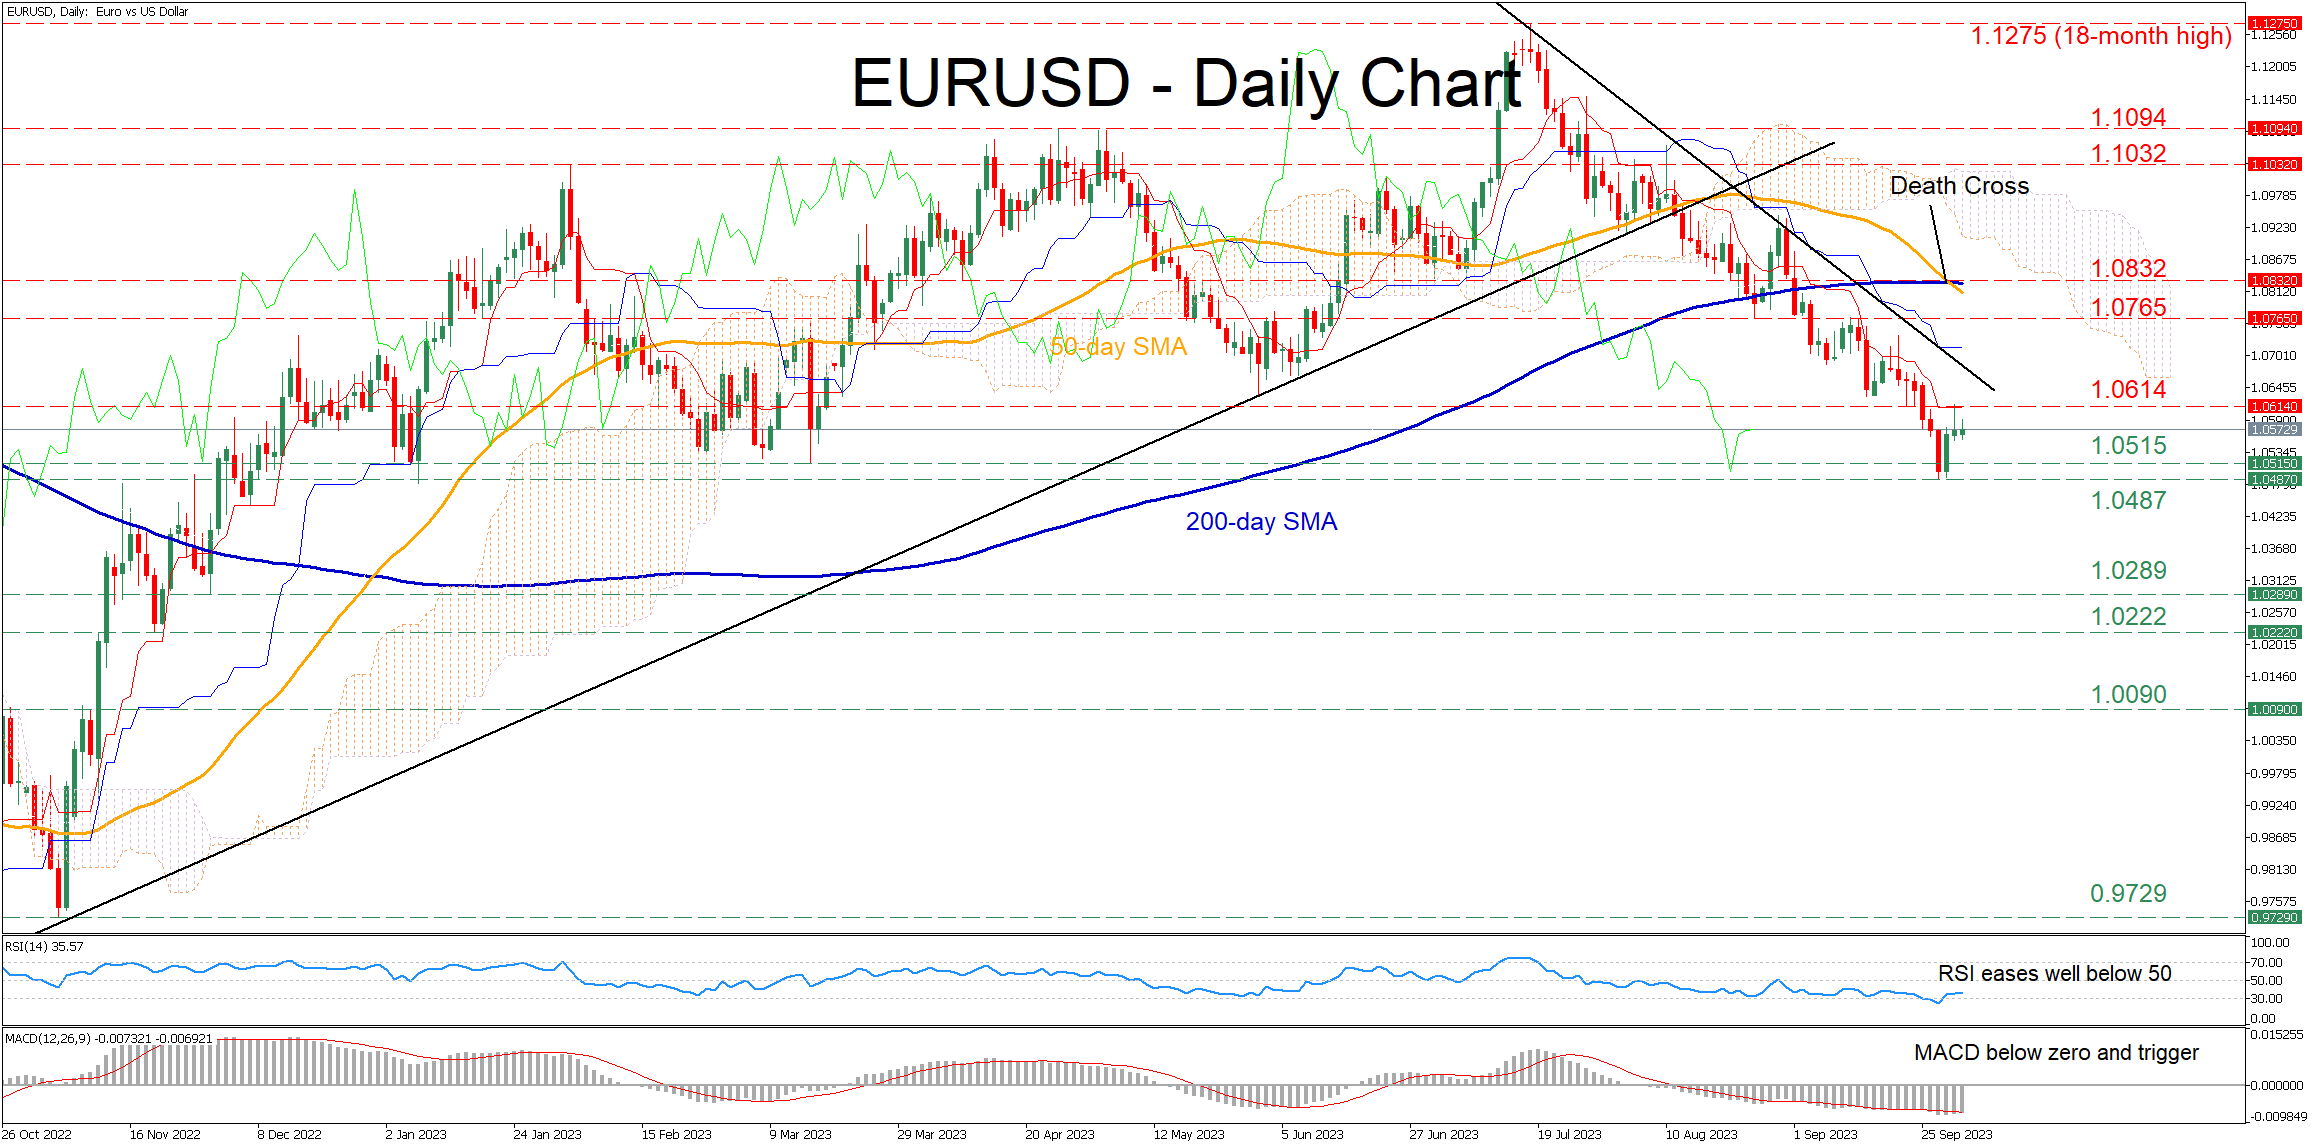 EURUSD Rebounds from 8-Month Low, Yet Downtrend Remains Formidable